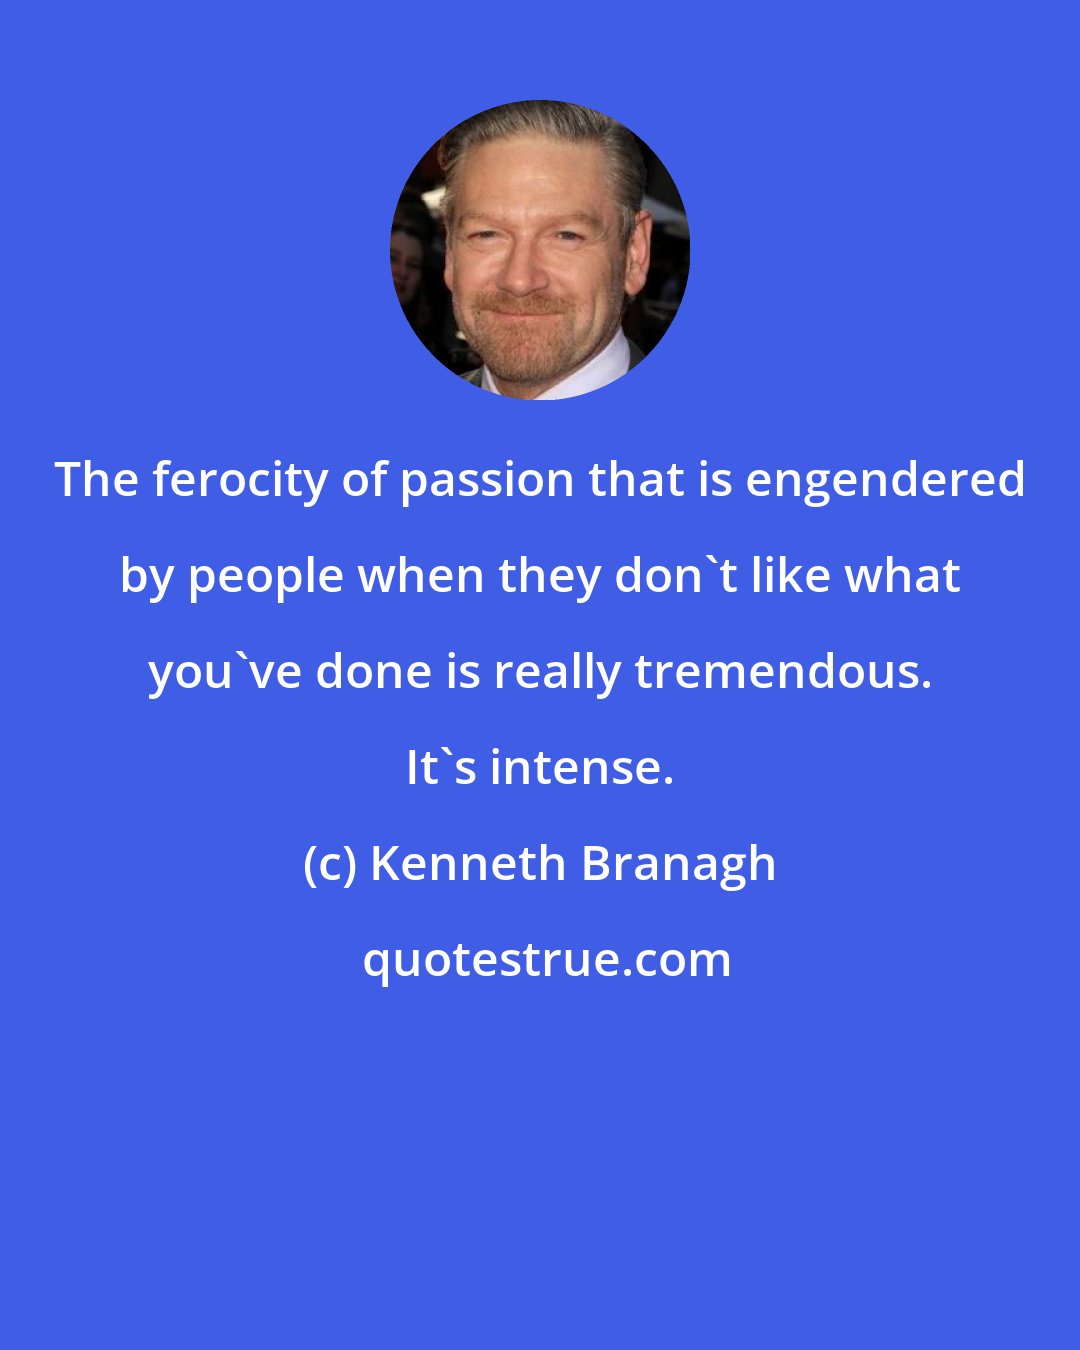 Kenneth Branagh: The ferocity of passion that is engendered by people when they don't like what you've done is really tremendous. It's intense.